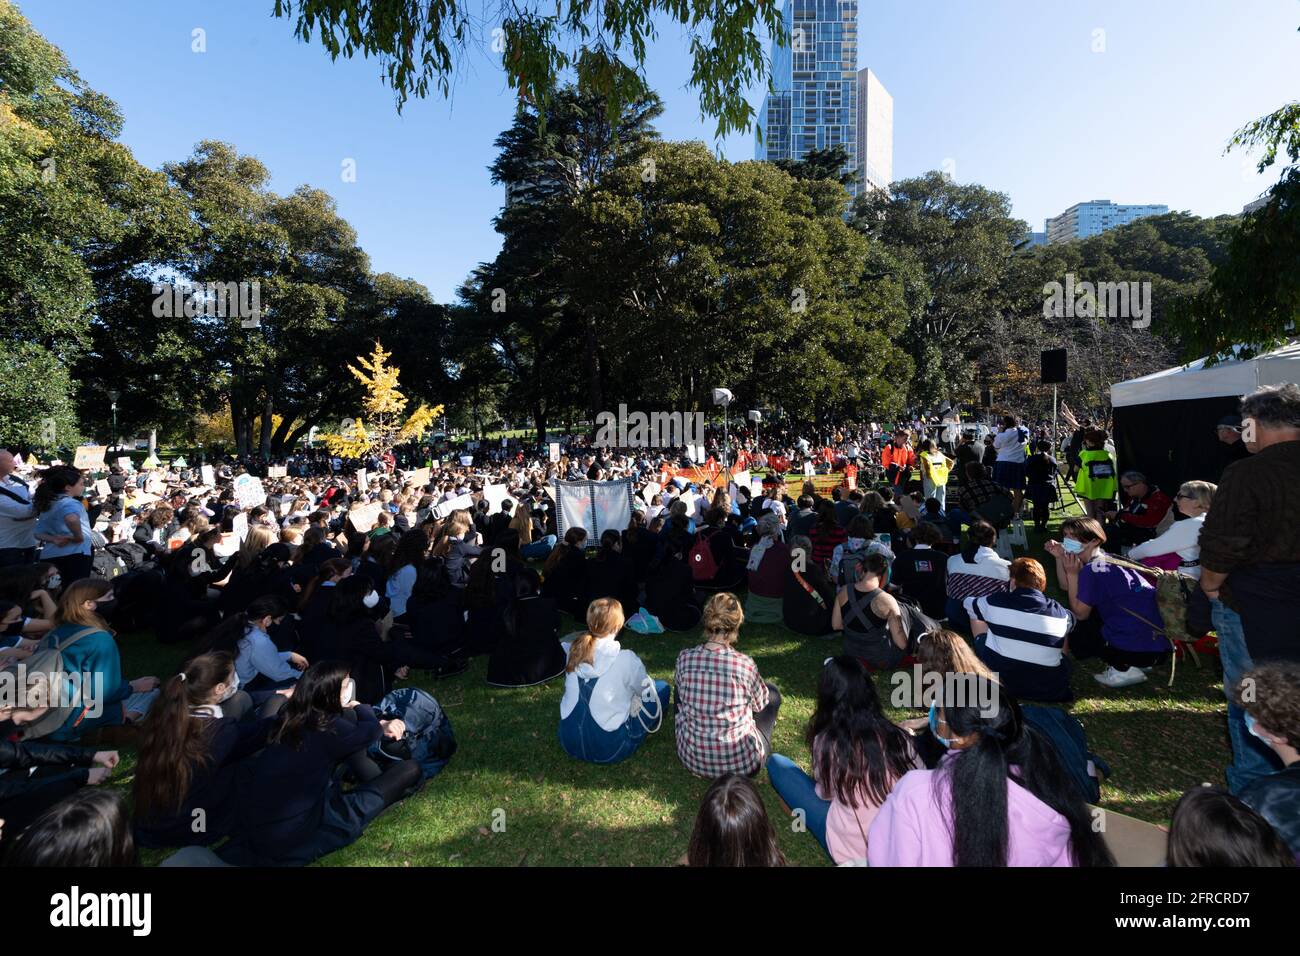 Melbourne, Australia 21 May 2021,the crowd at a rally that brought 1000s of school students and supporters to the streets  of Melbourne for the 'Schools Strike 4 Climate' protests that called on governments around the world to take action on Climate change. Credit: Michael Currie/Alamy Live News Stock Photo